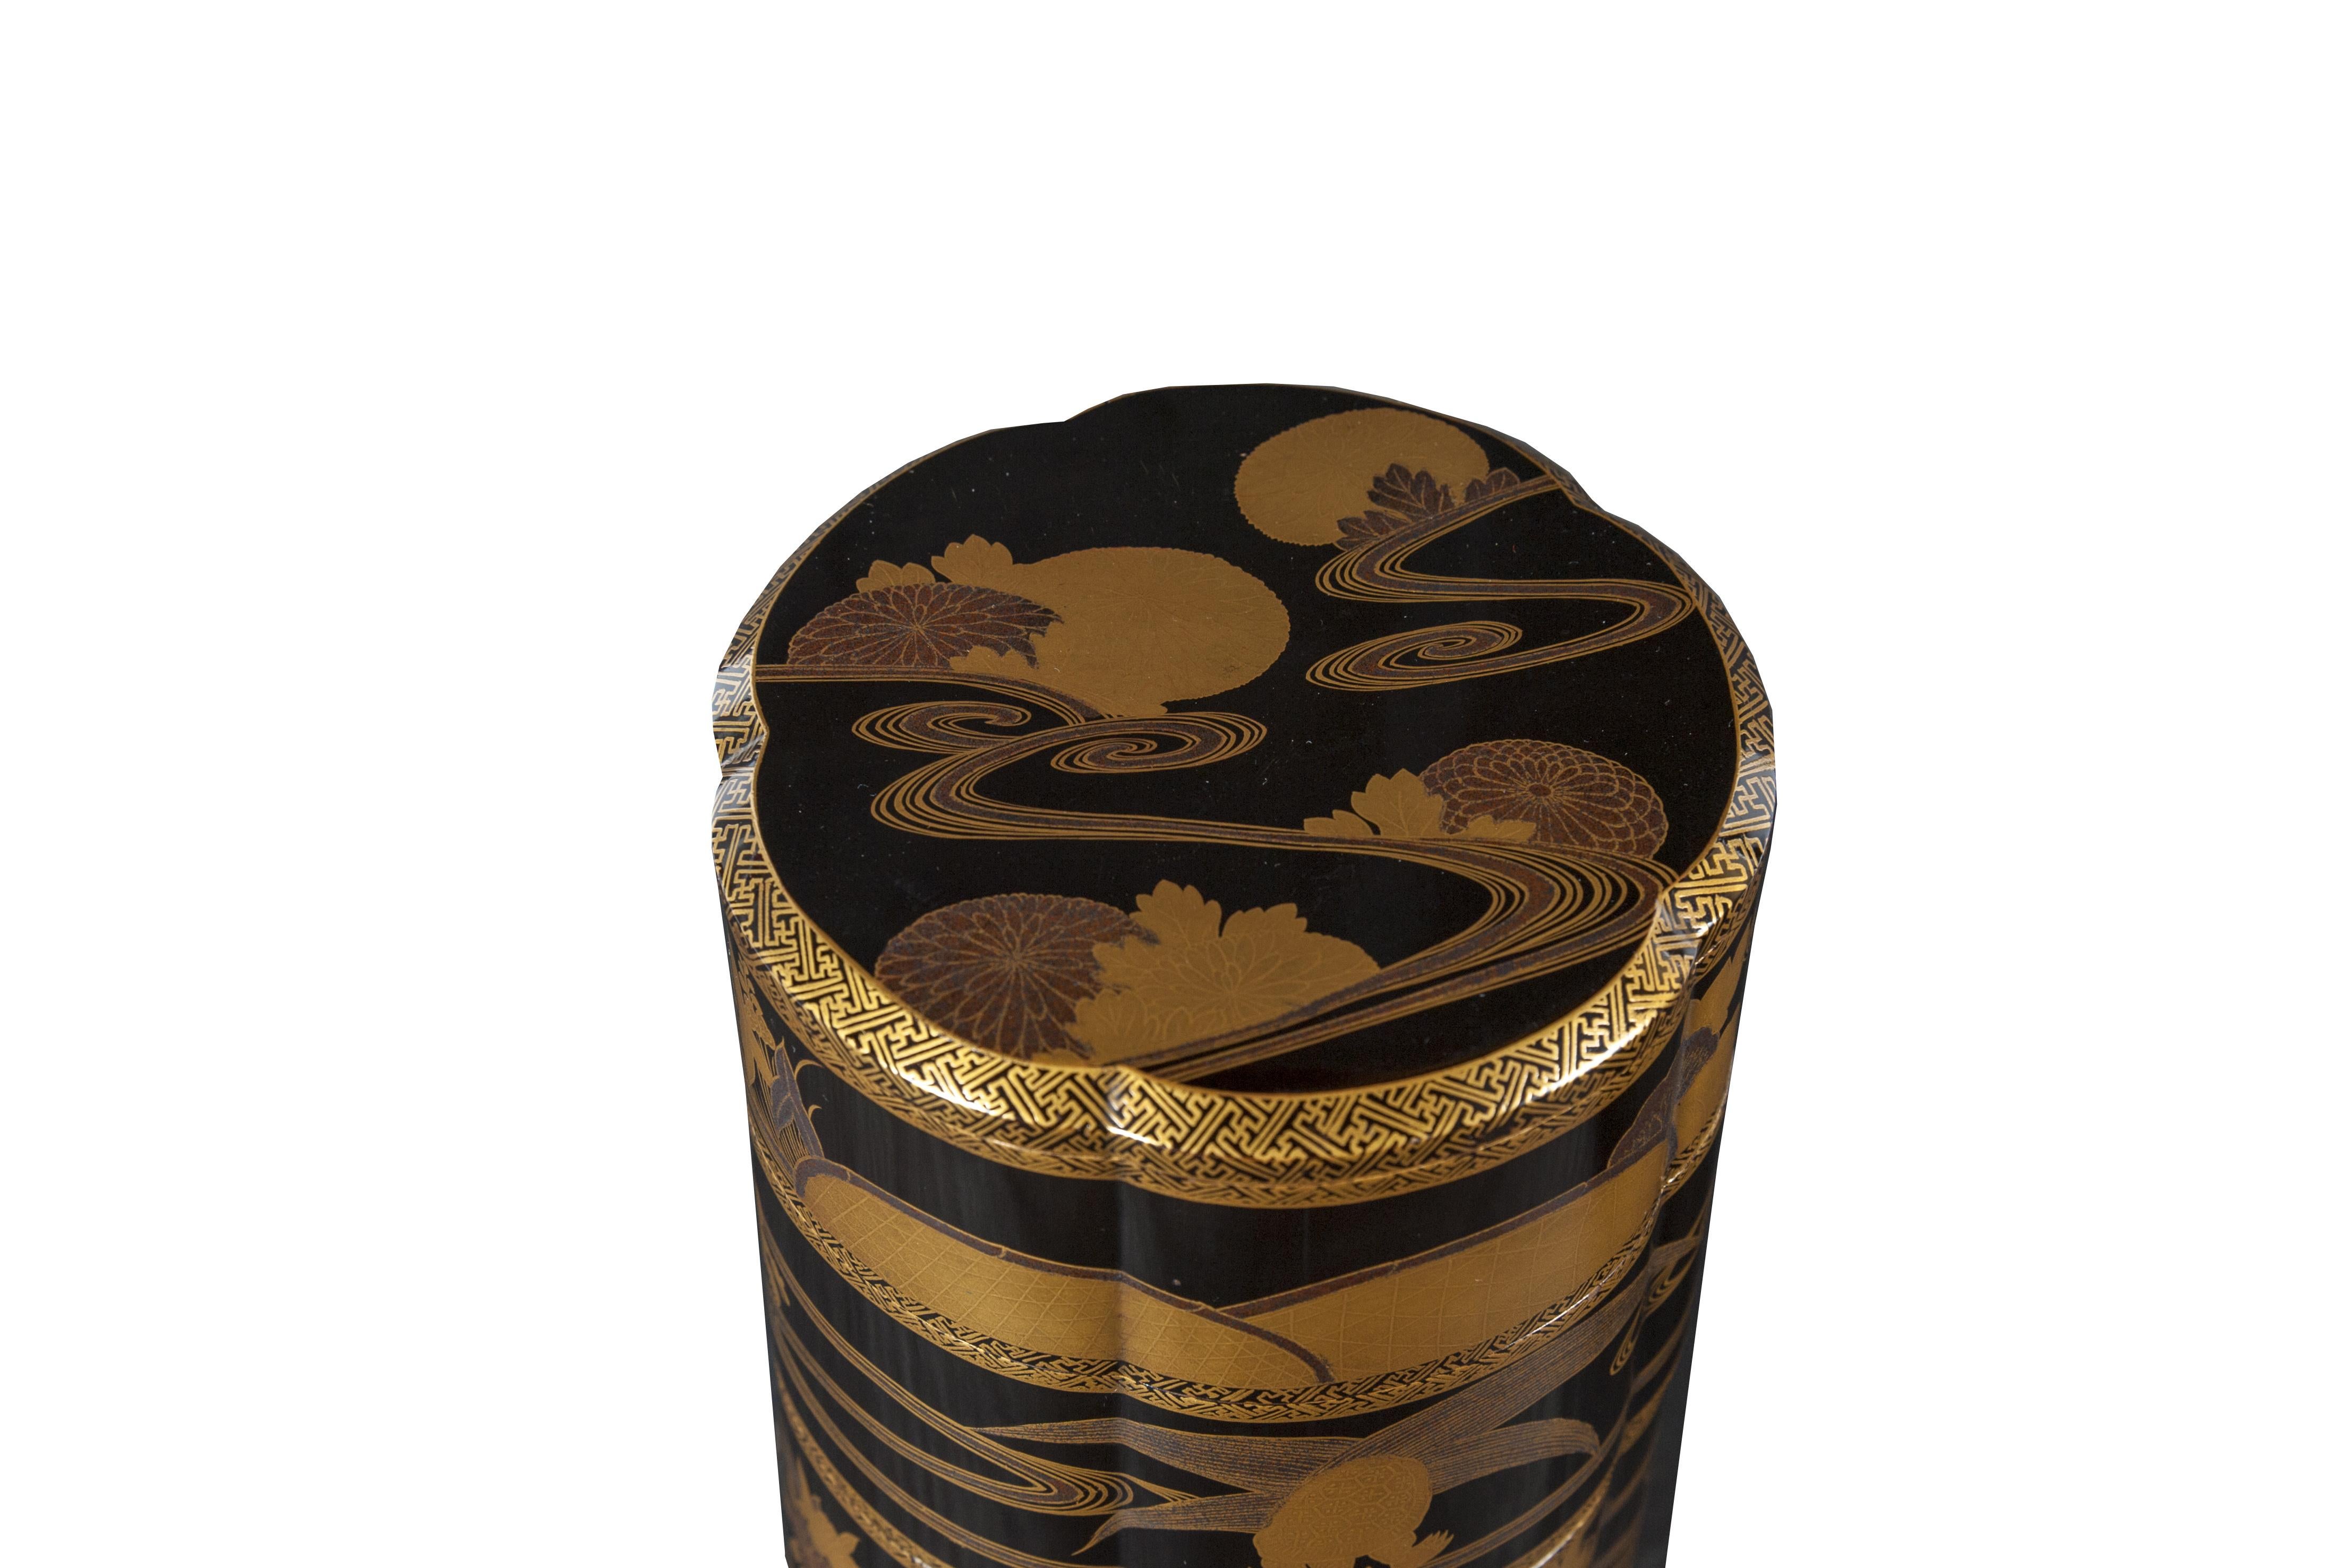 Fine Japanese Black and Gold Lacquer Sageju-Bako - Picnic Box For Sale 3